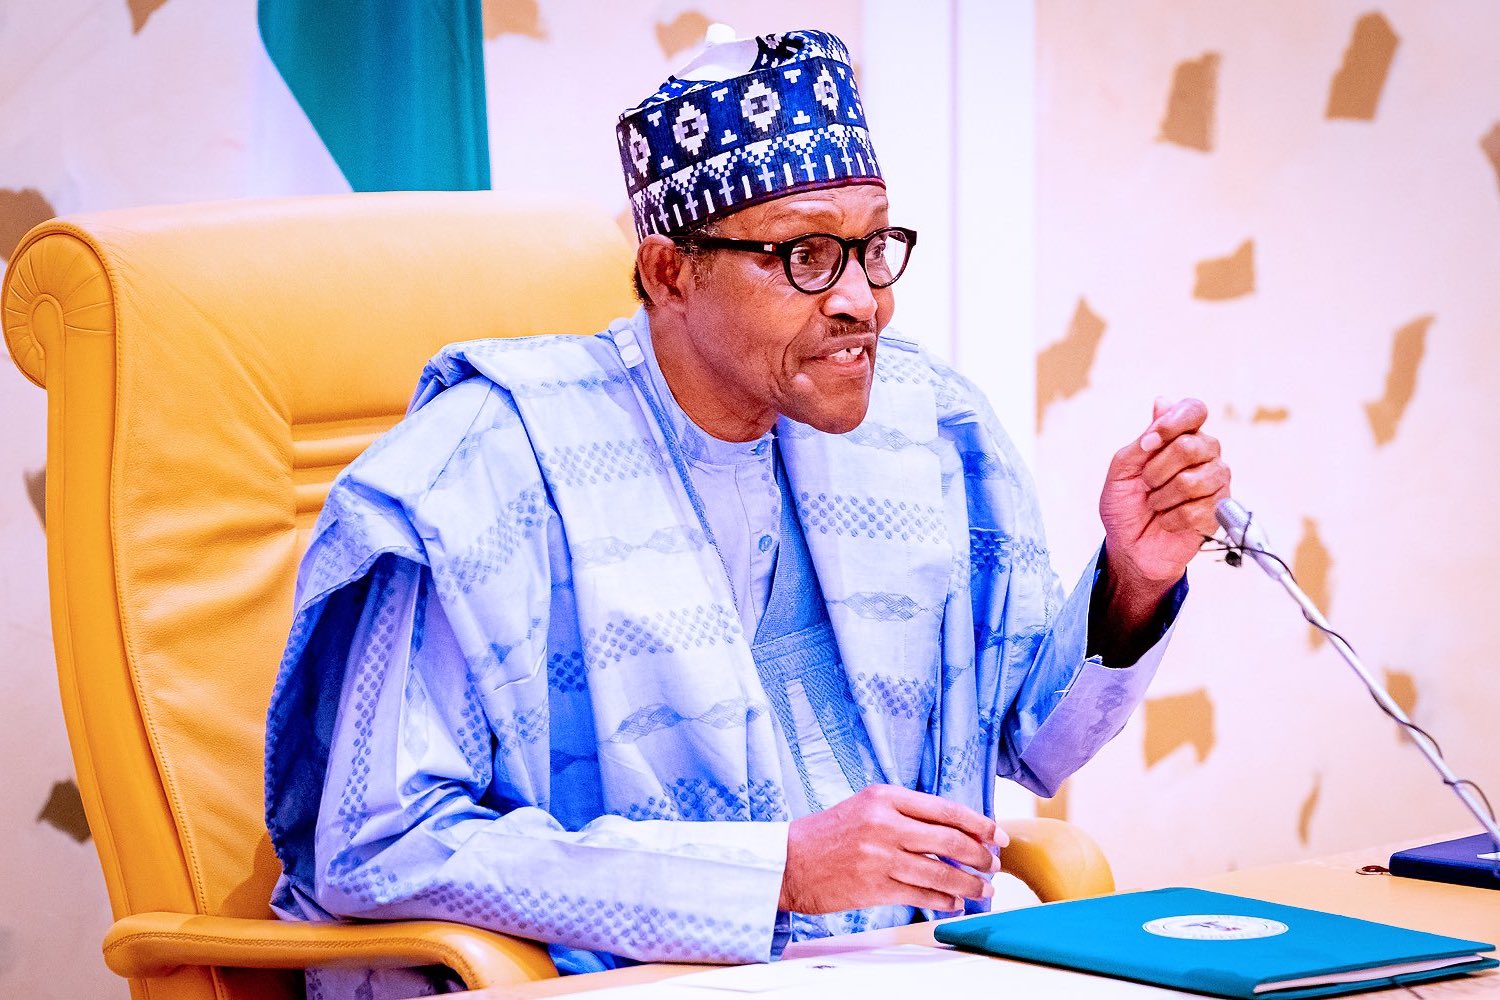 Ways Buhari/APC Is Already Rigging The 2023 Elections